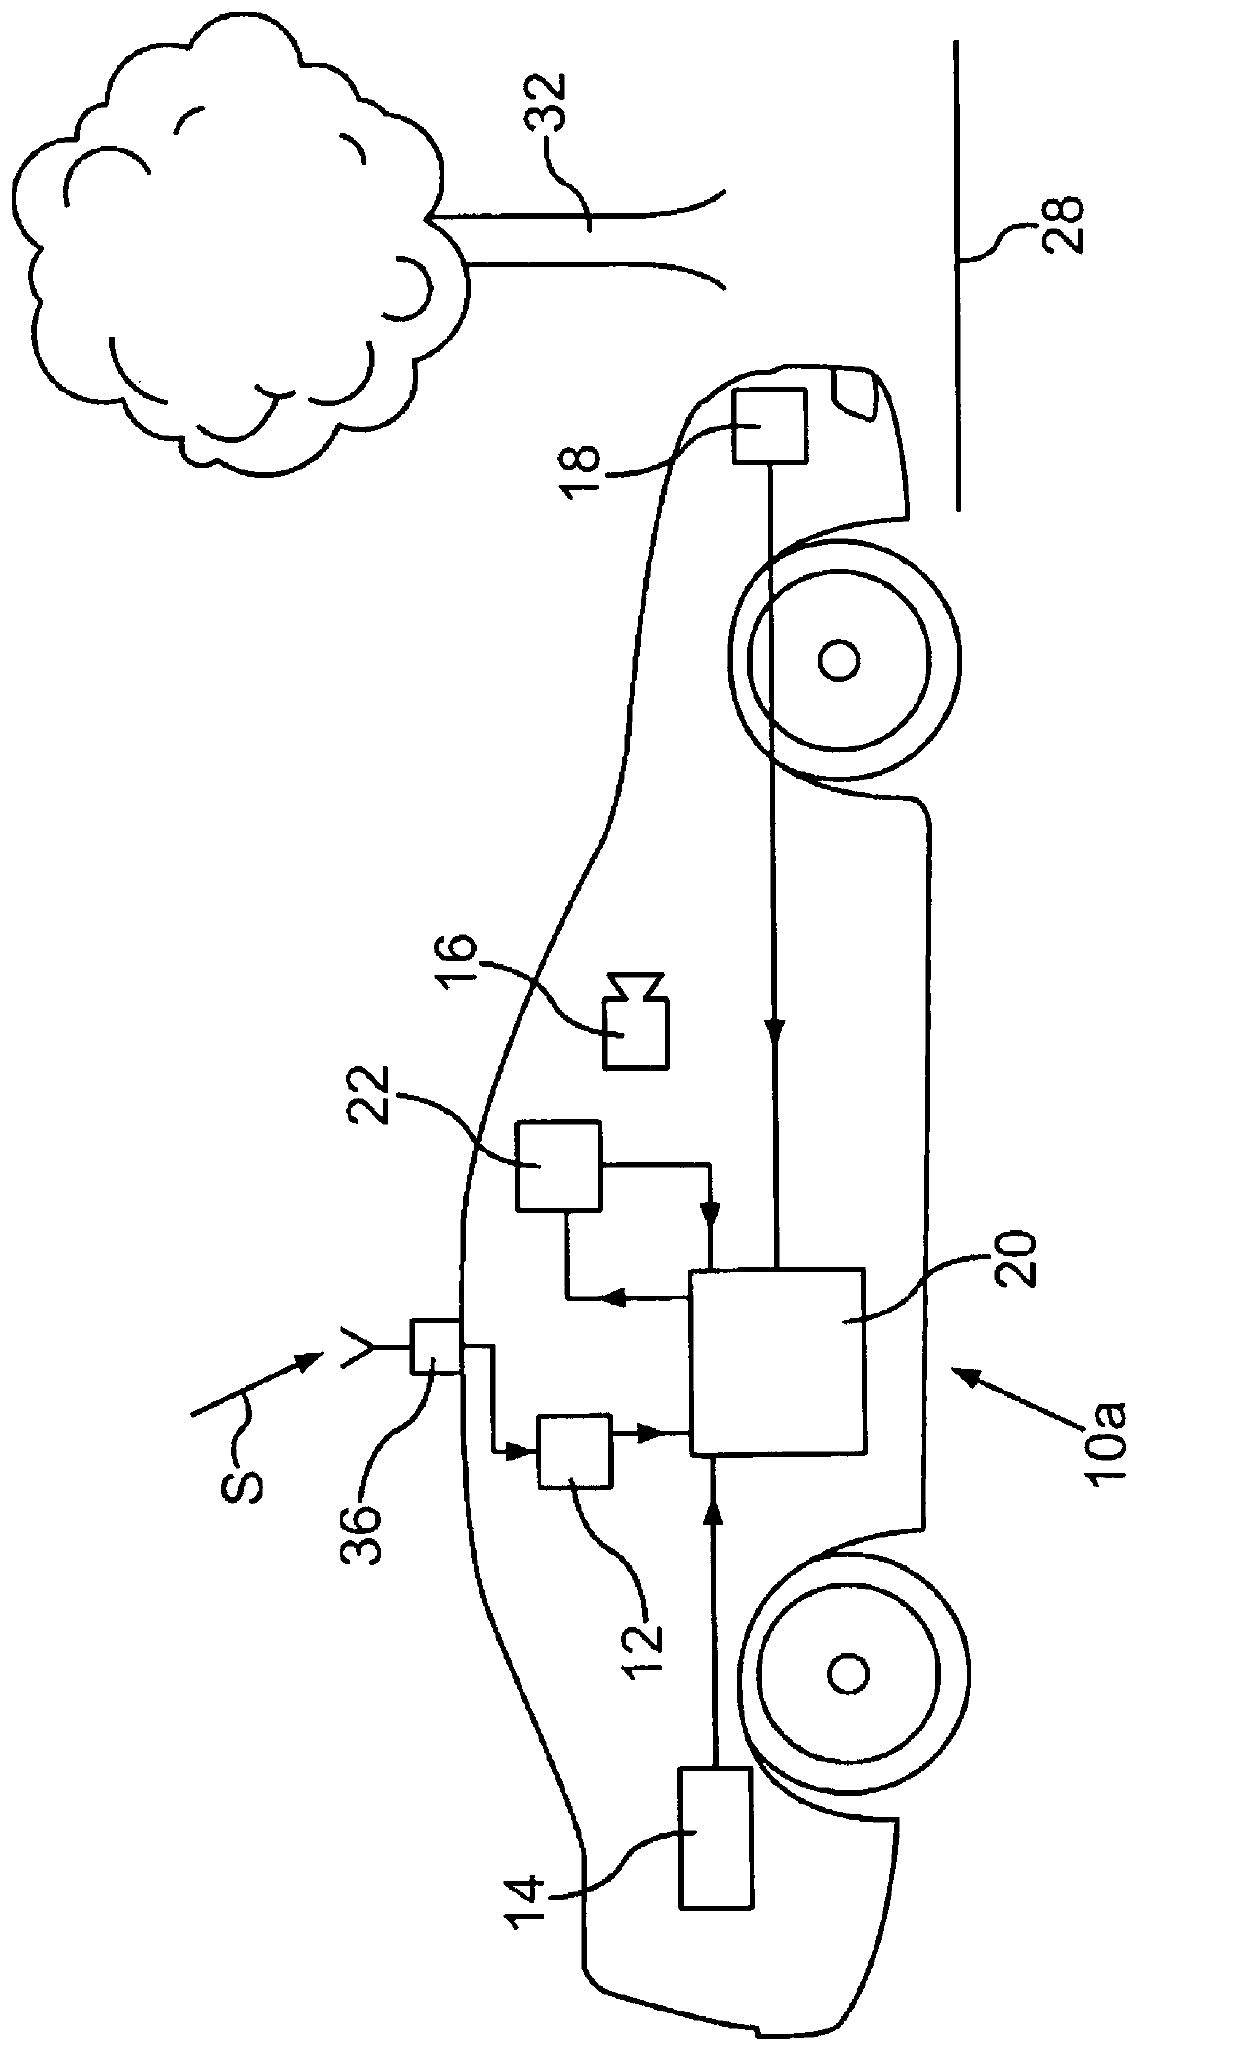 Method and device for determining the position of a vehicle on a carriageway and motor vehicle having such a device